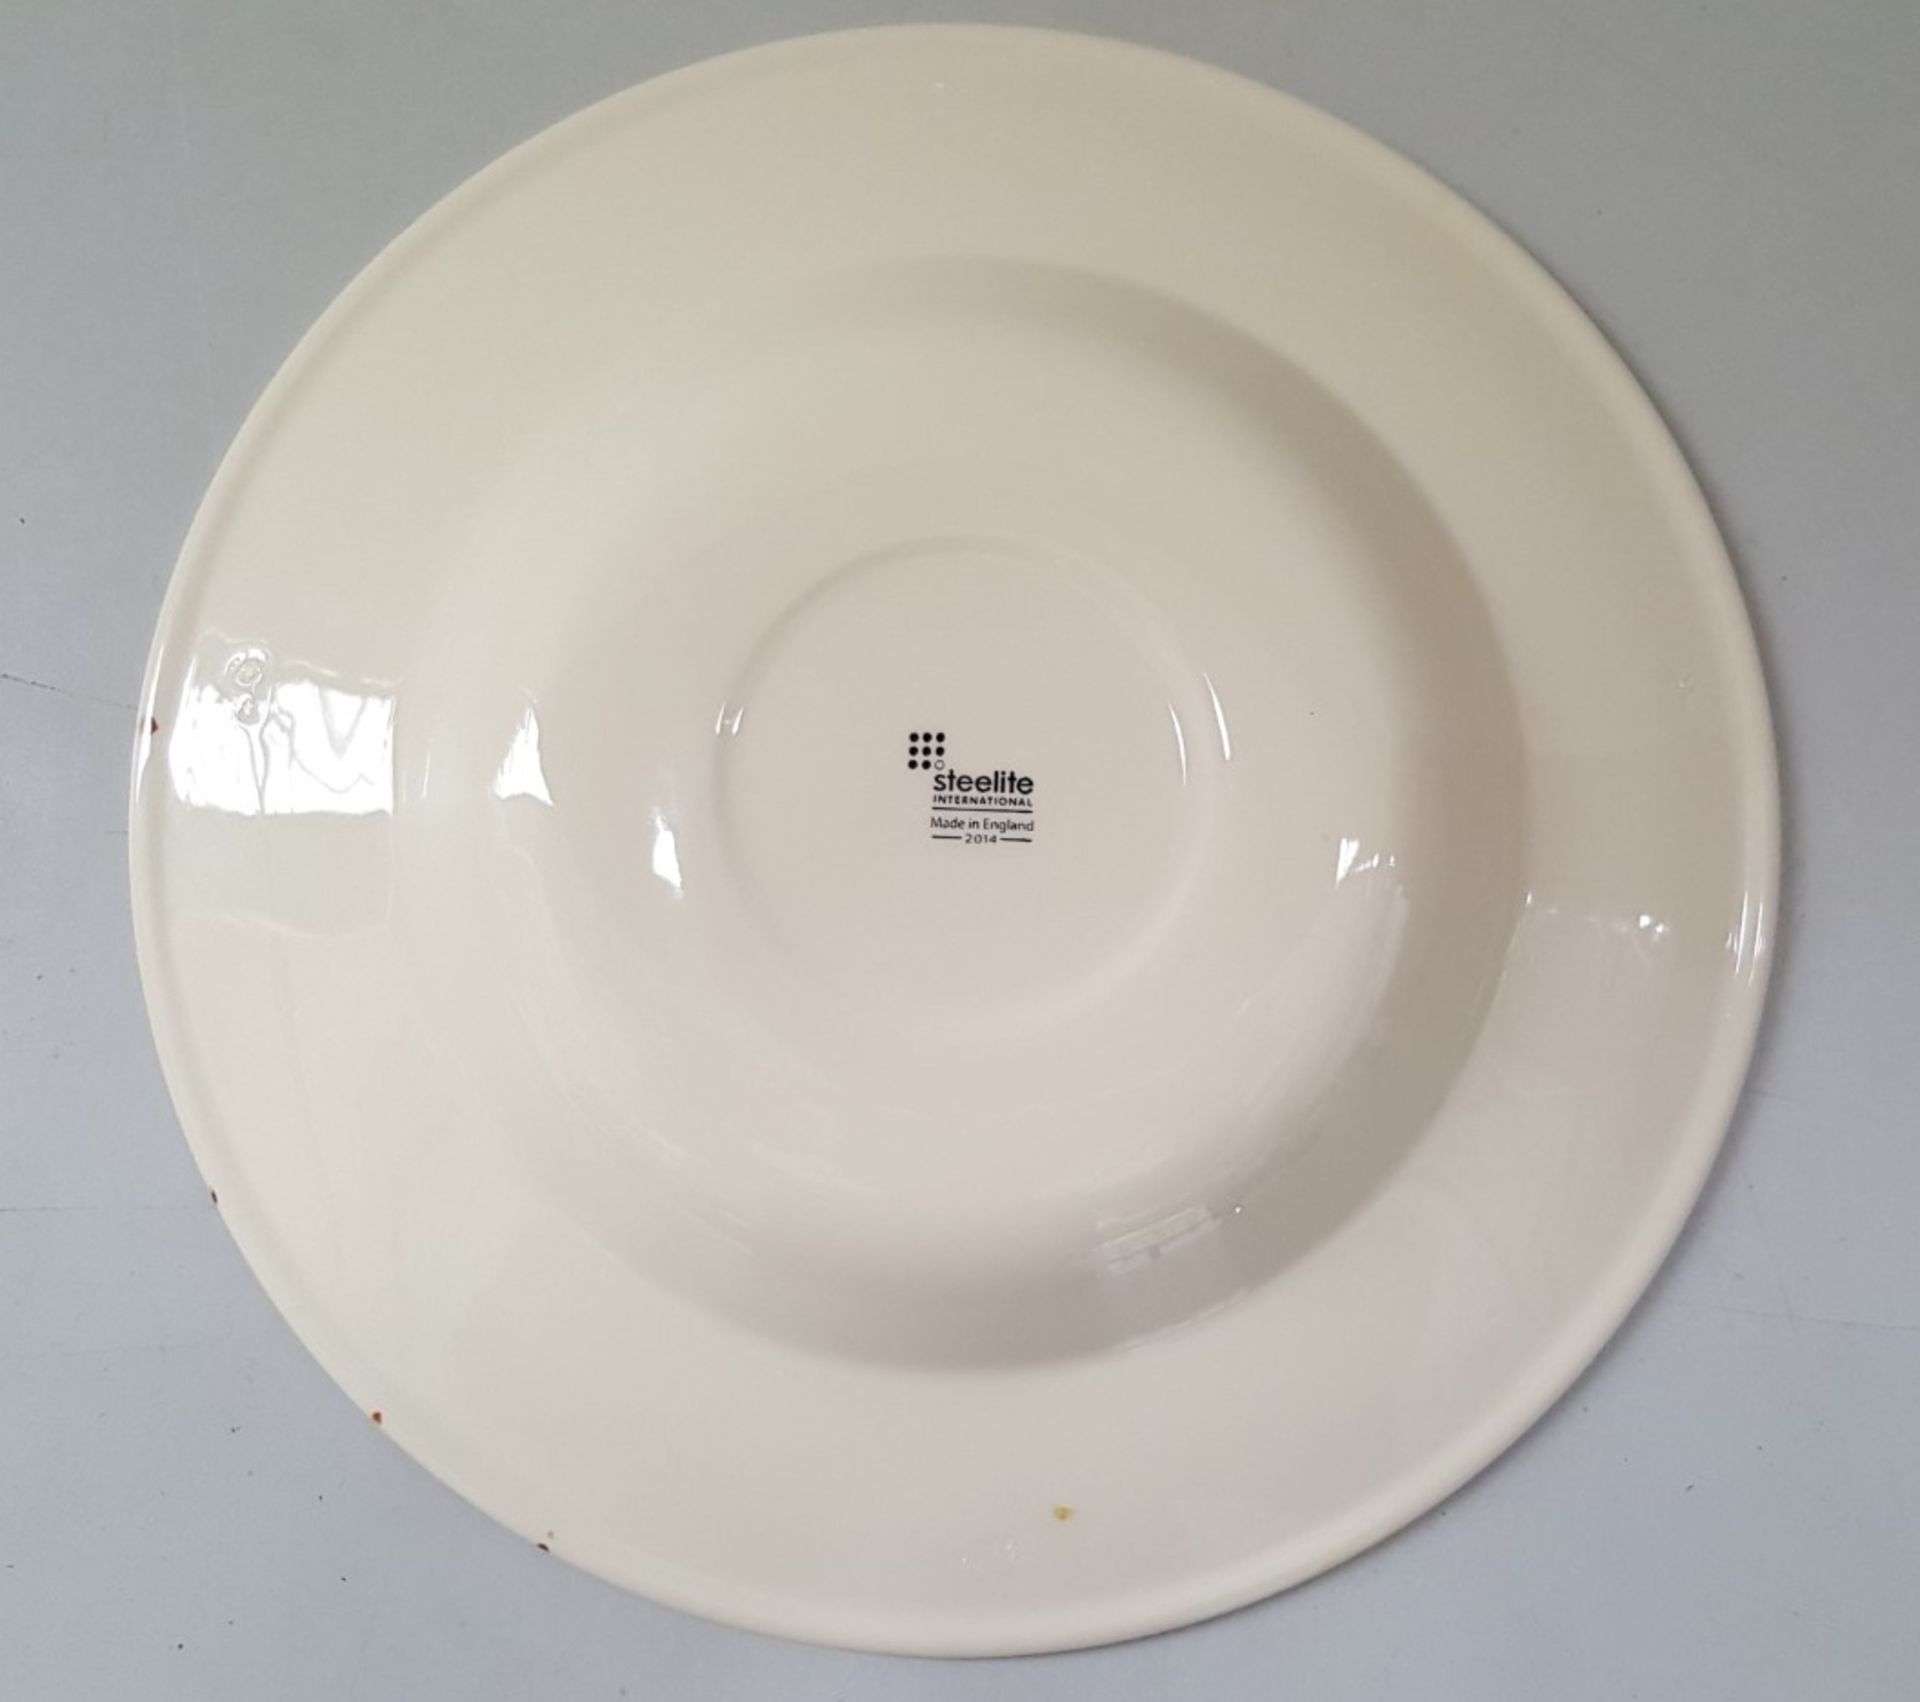 15 x Steelite Soup Plates Cream With Pattered Egde 26.5CM - Ref CQ263 - Image 3 of 5